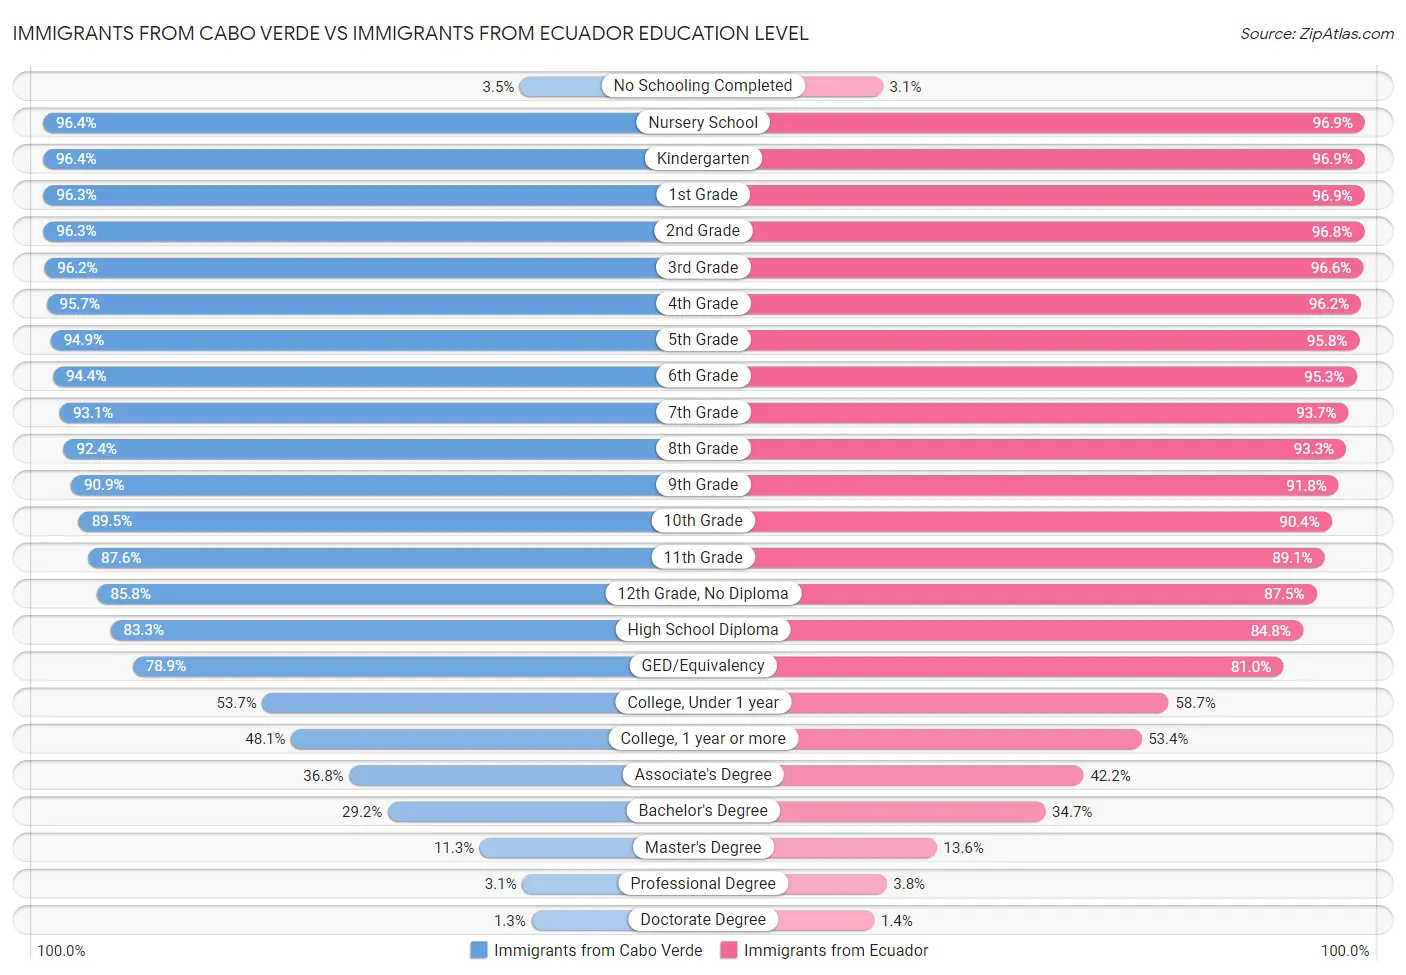 Immigrants from Cabo Verde vs Immigrants from Ecuador Education Level